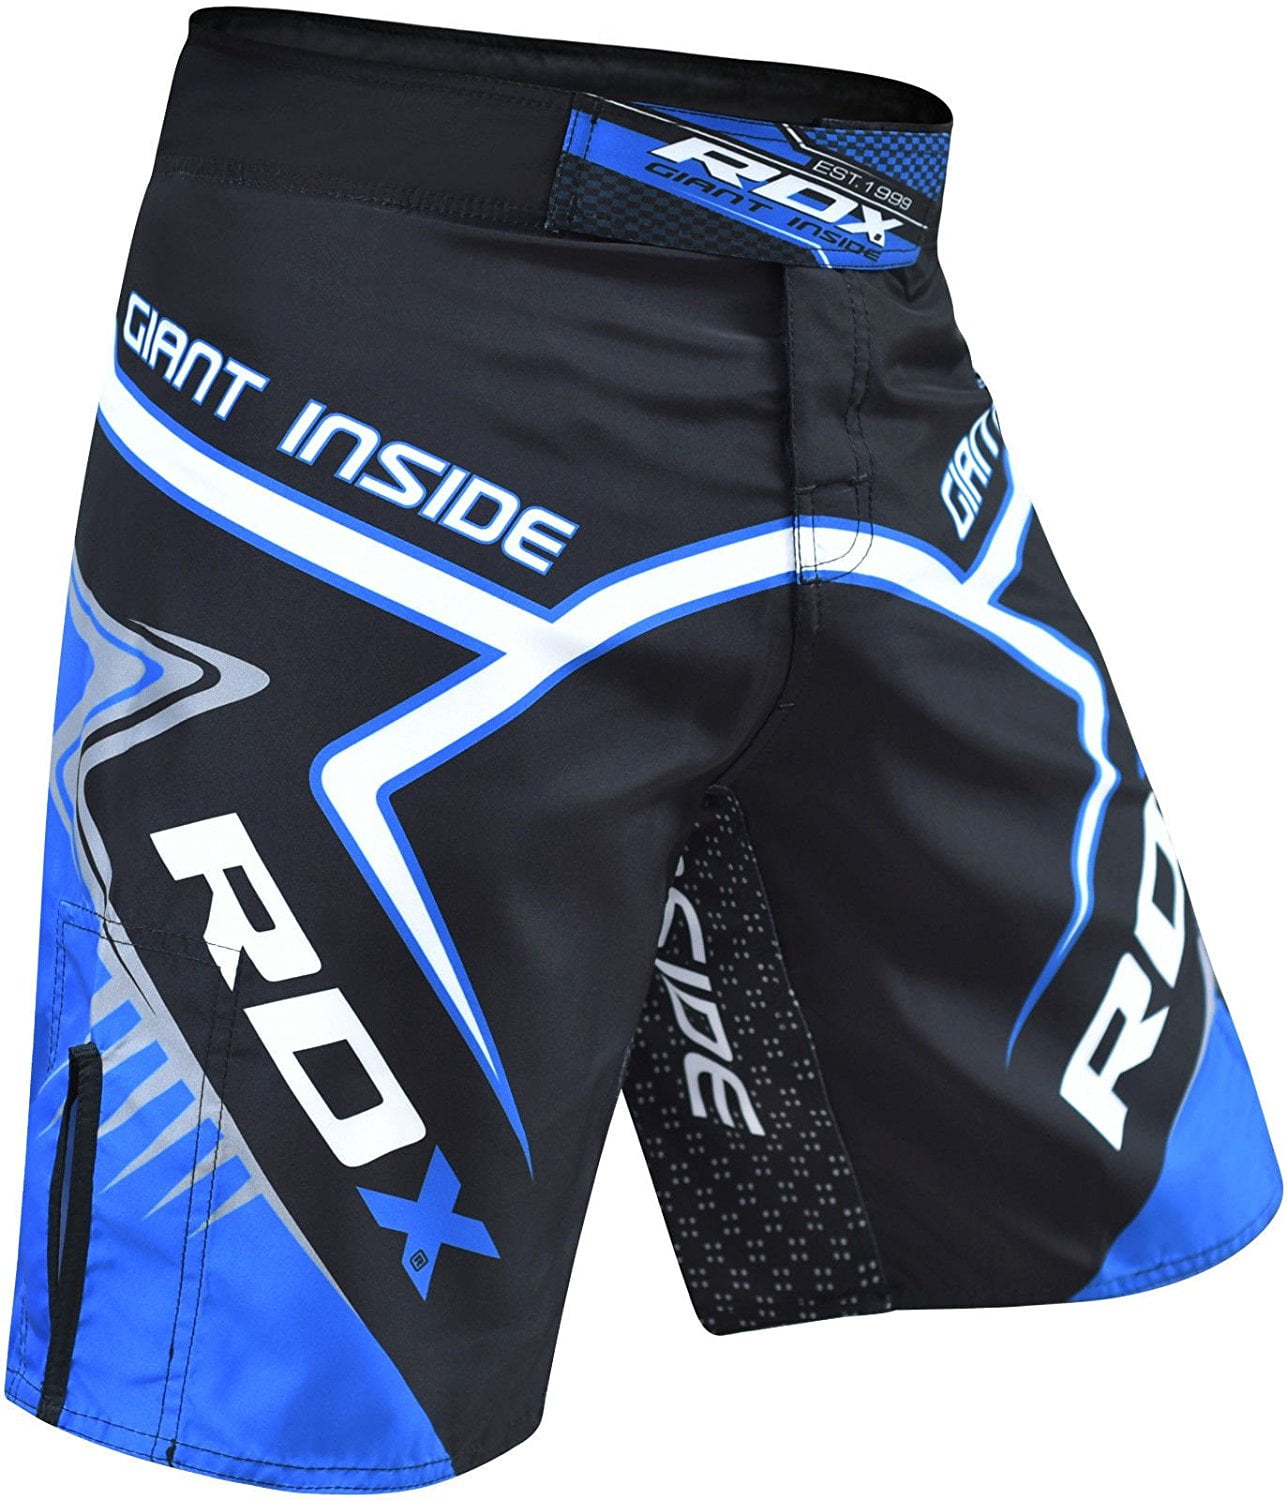 Mma Fight Shorts Grappling Cage Ufc Thai Kick Boxing Gym Martial Arts Wear Short 